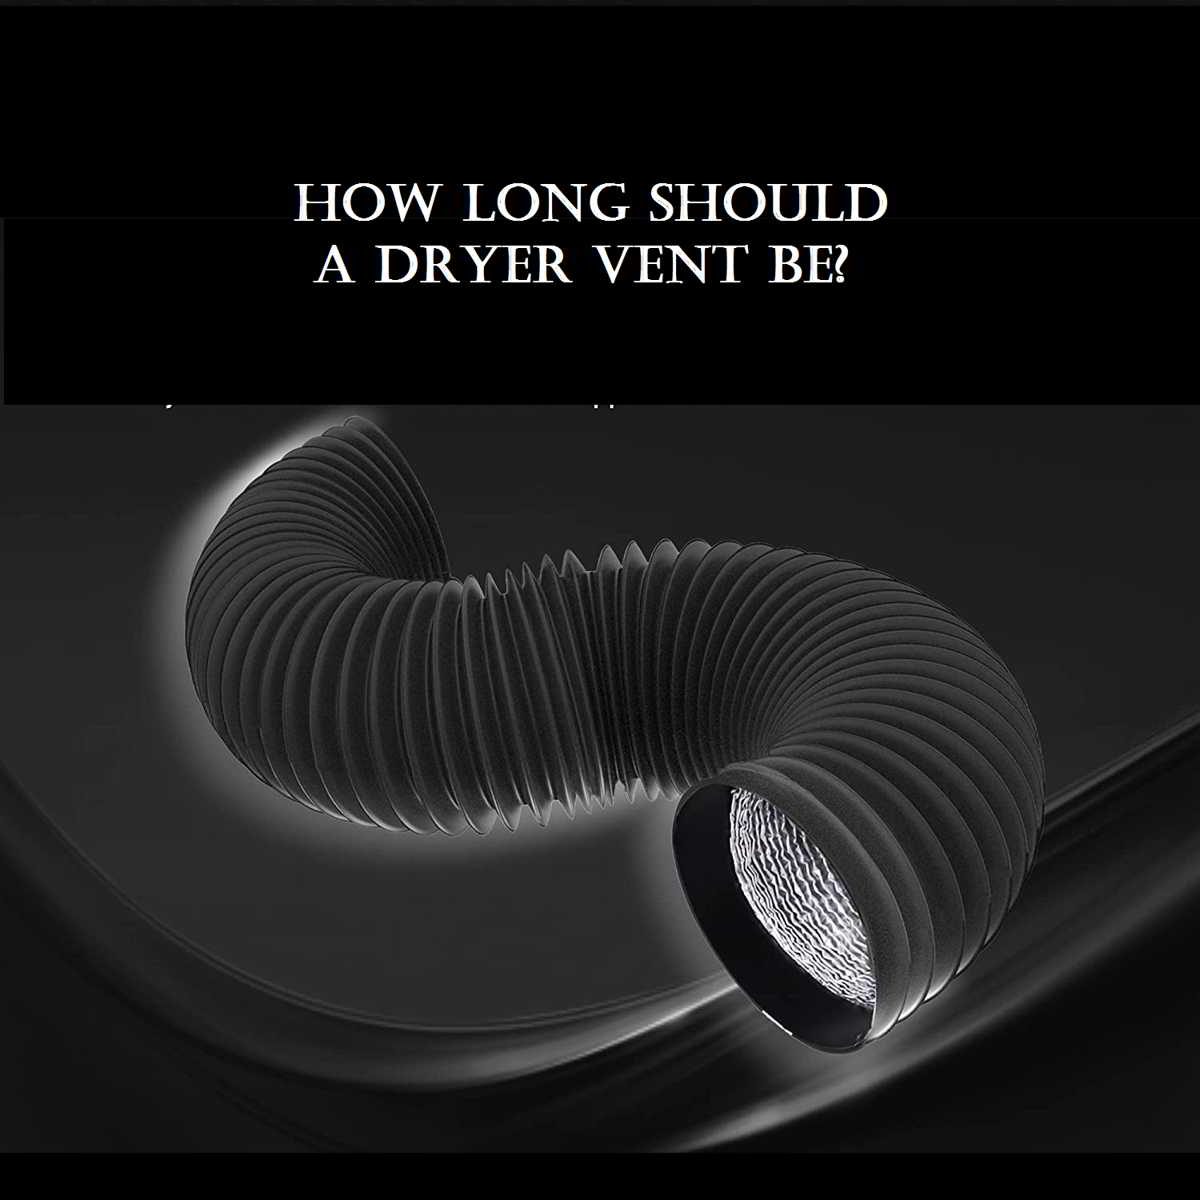 How long can a dryer vent be